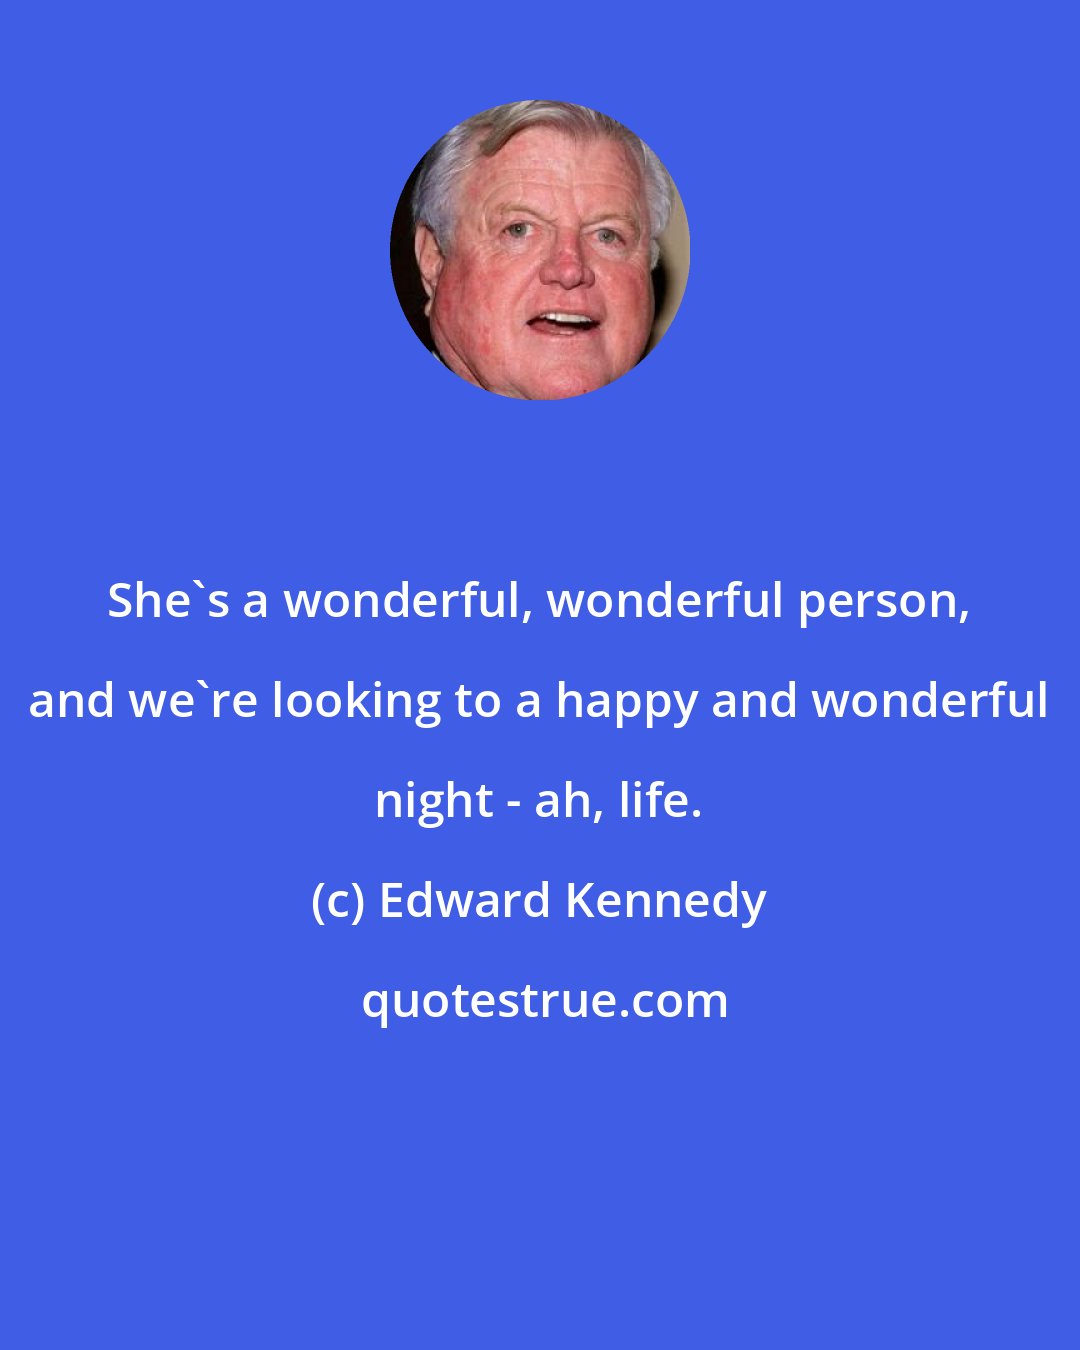 Edward Kennedy: She's a wonderful, wonderful person, and we're looking to a happy and wonderful night - ah, life.